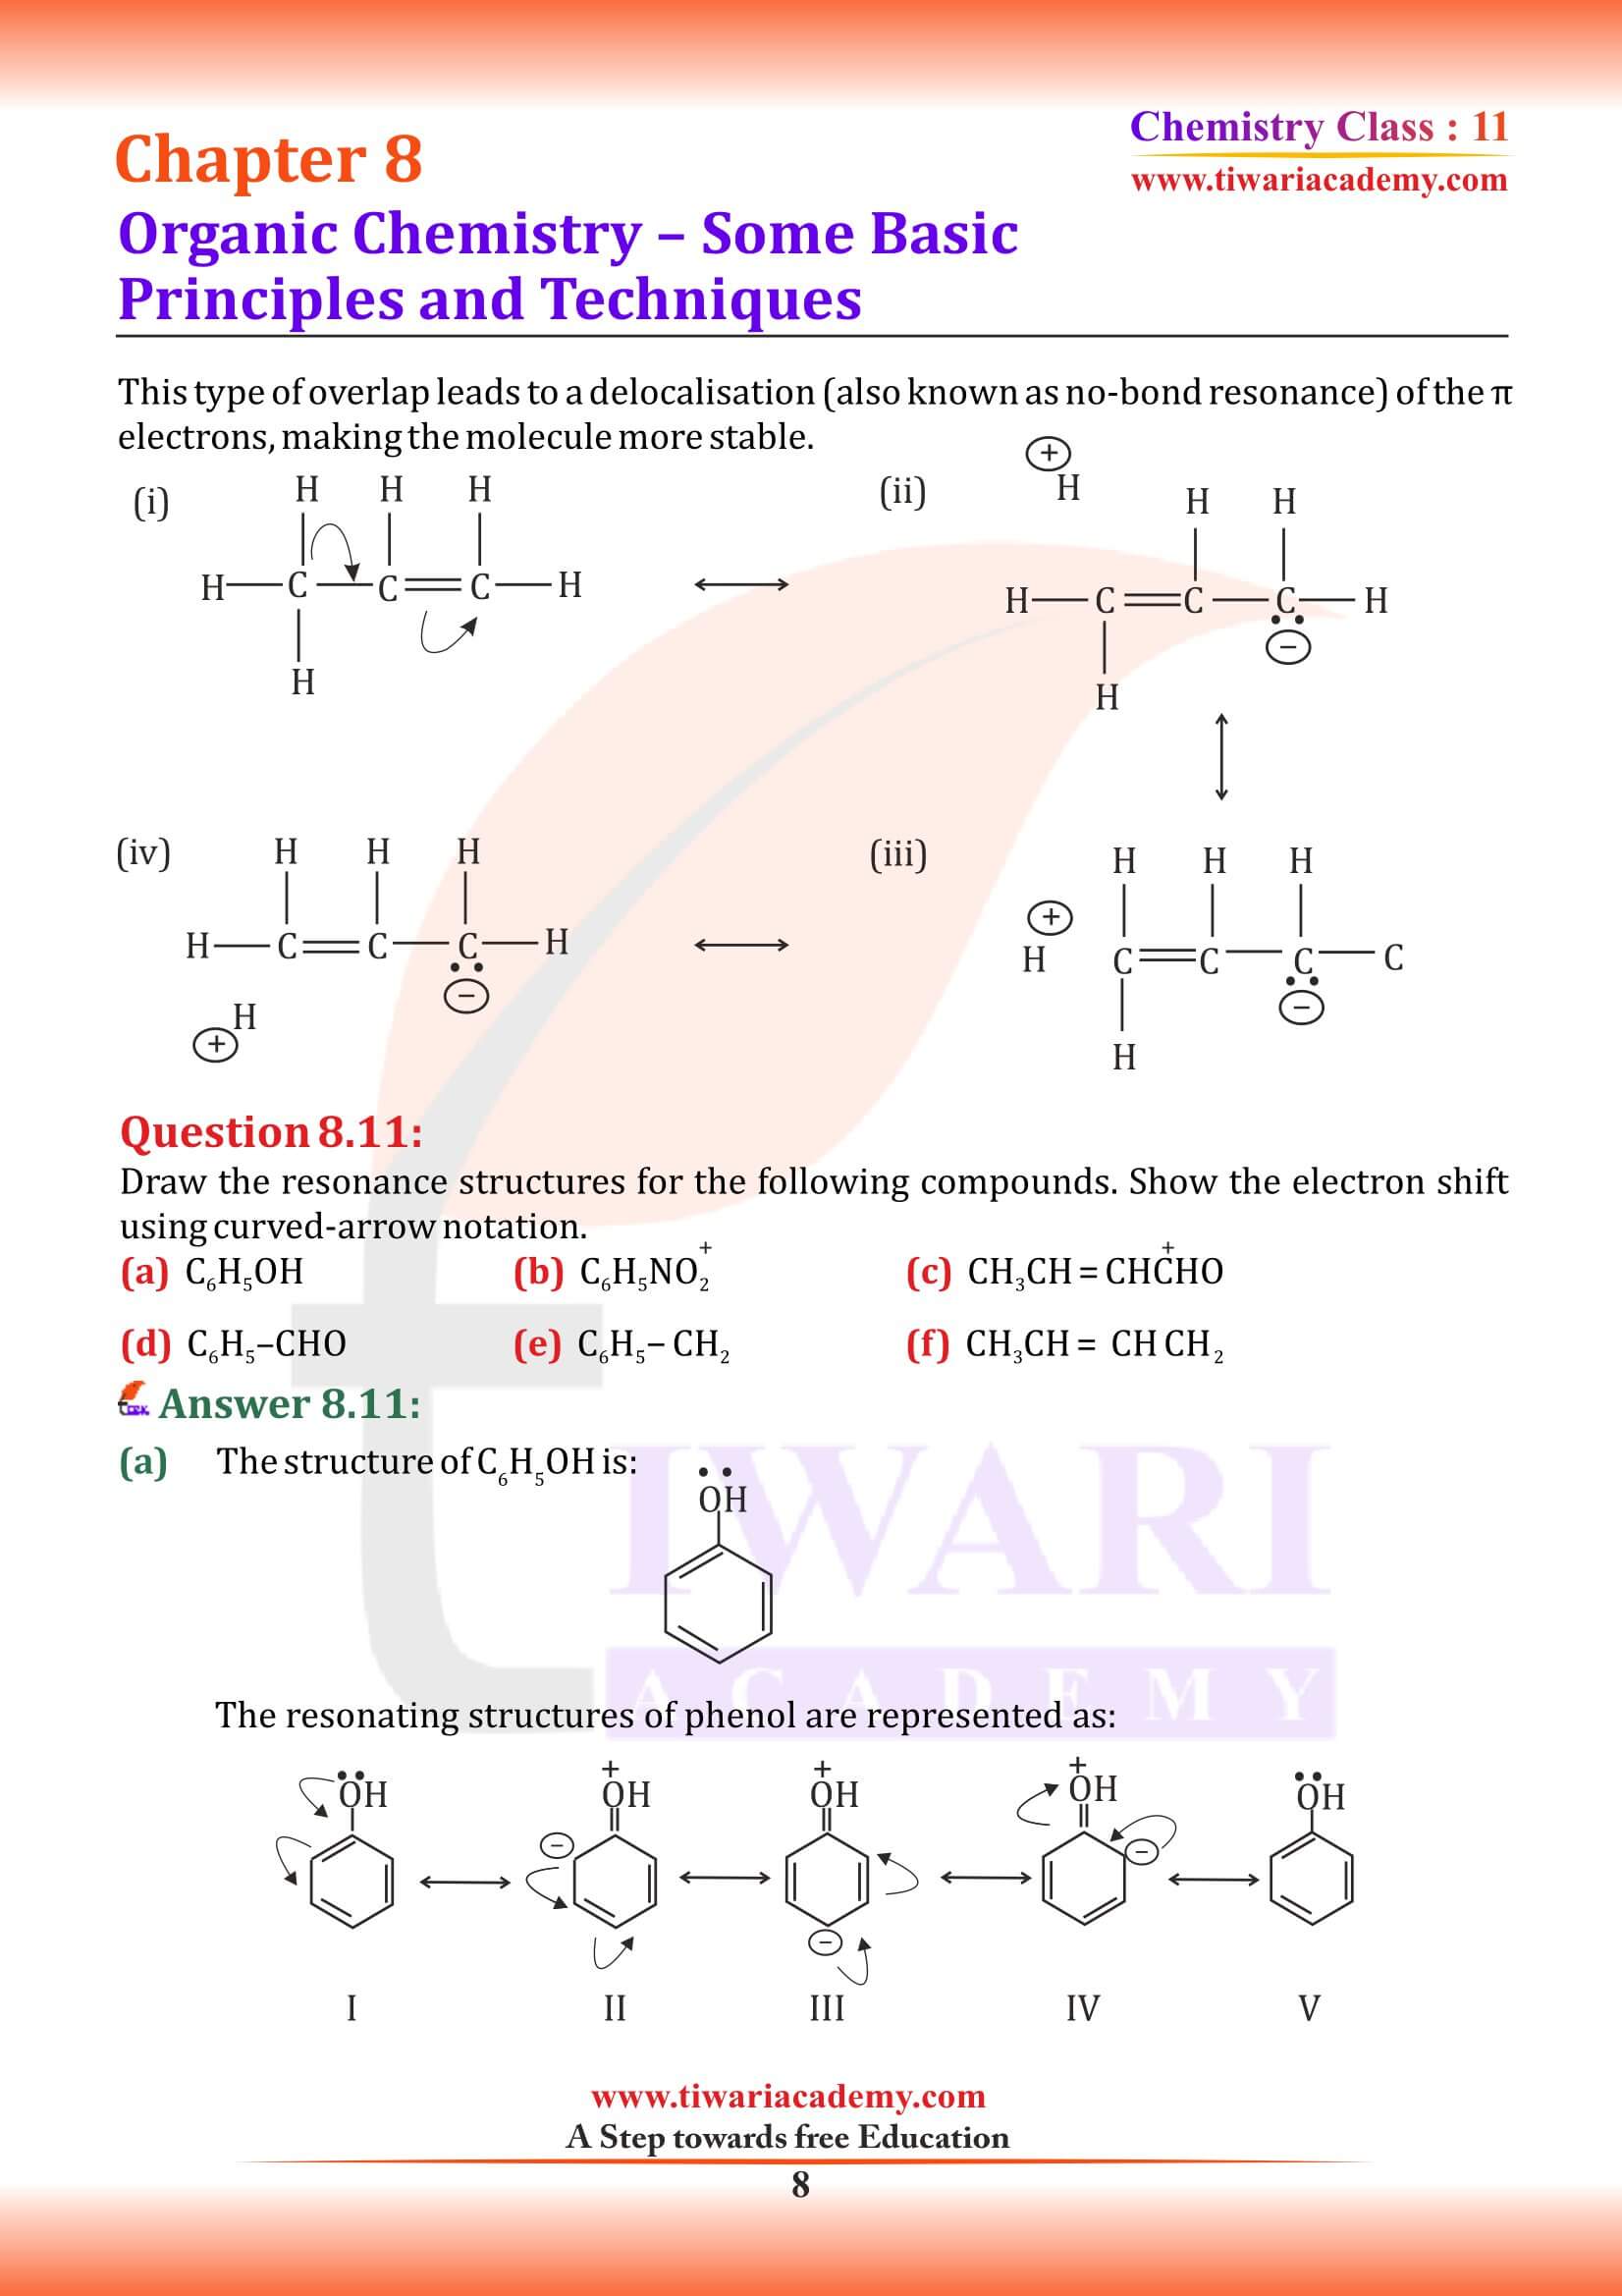 NCERT Solutions for Class 11 Chemistry Chapter 8 updated